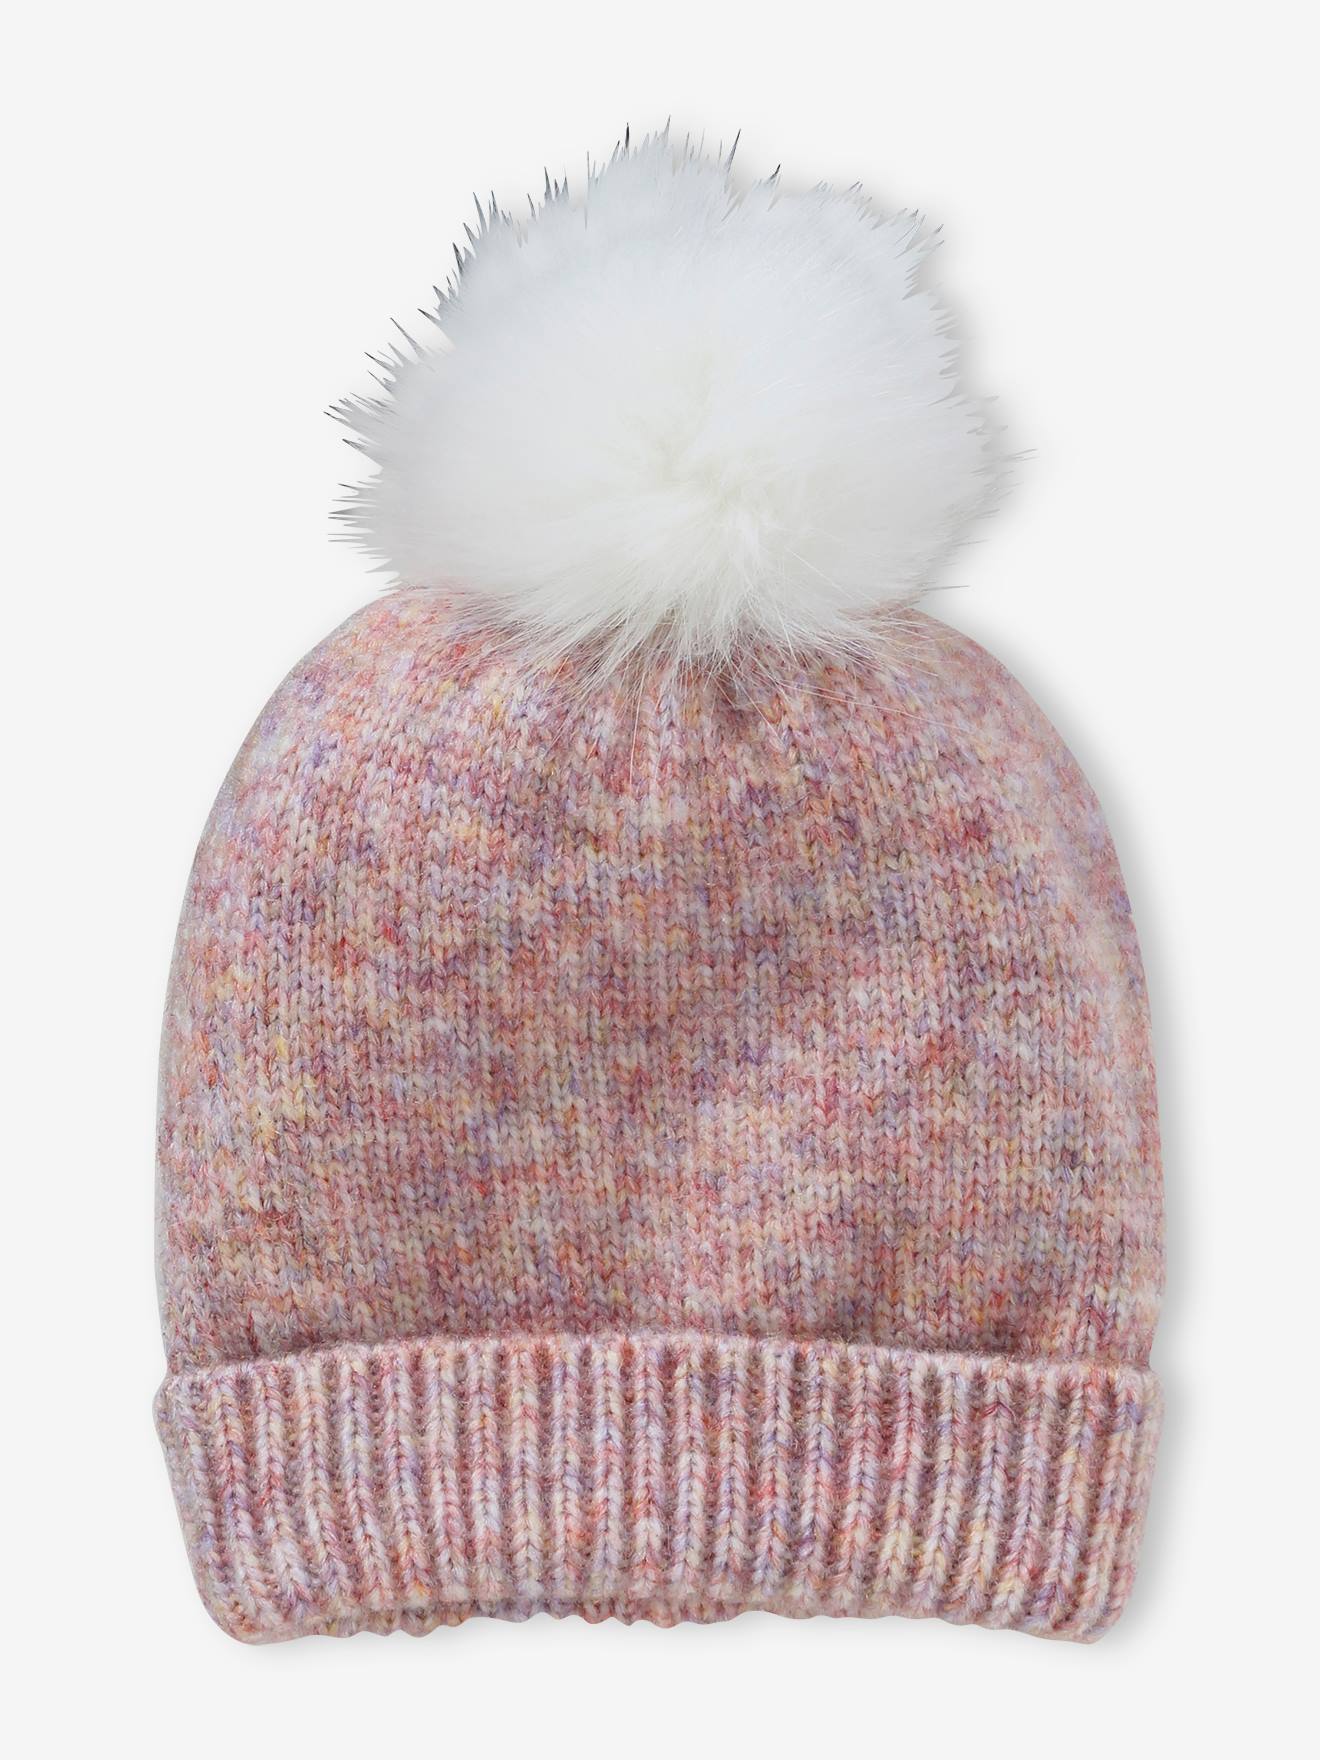 Pop Vintage Beanie in Mixed Knit for Girls rose